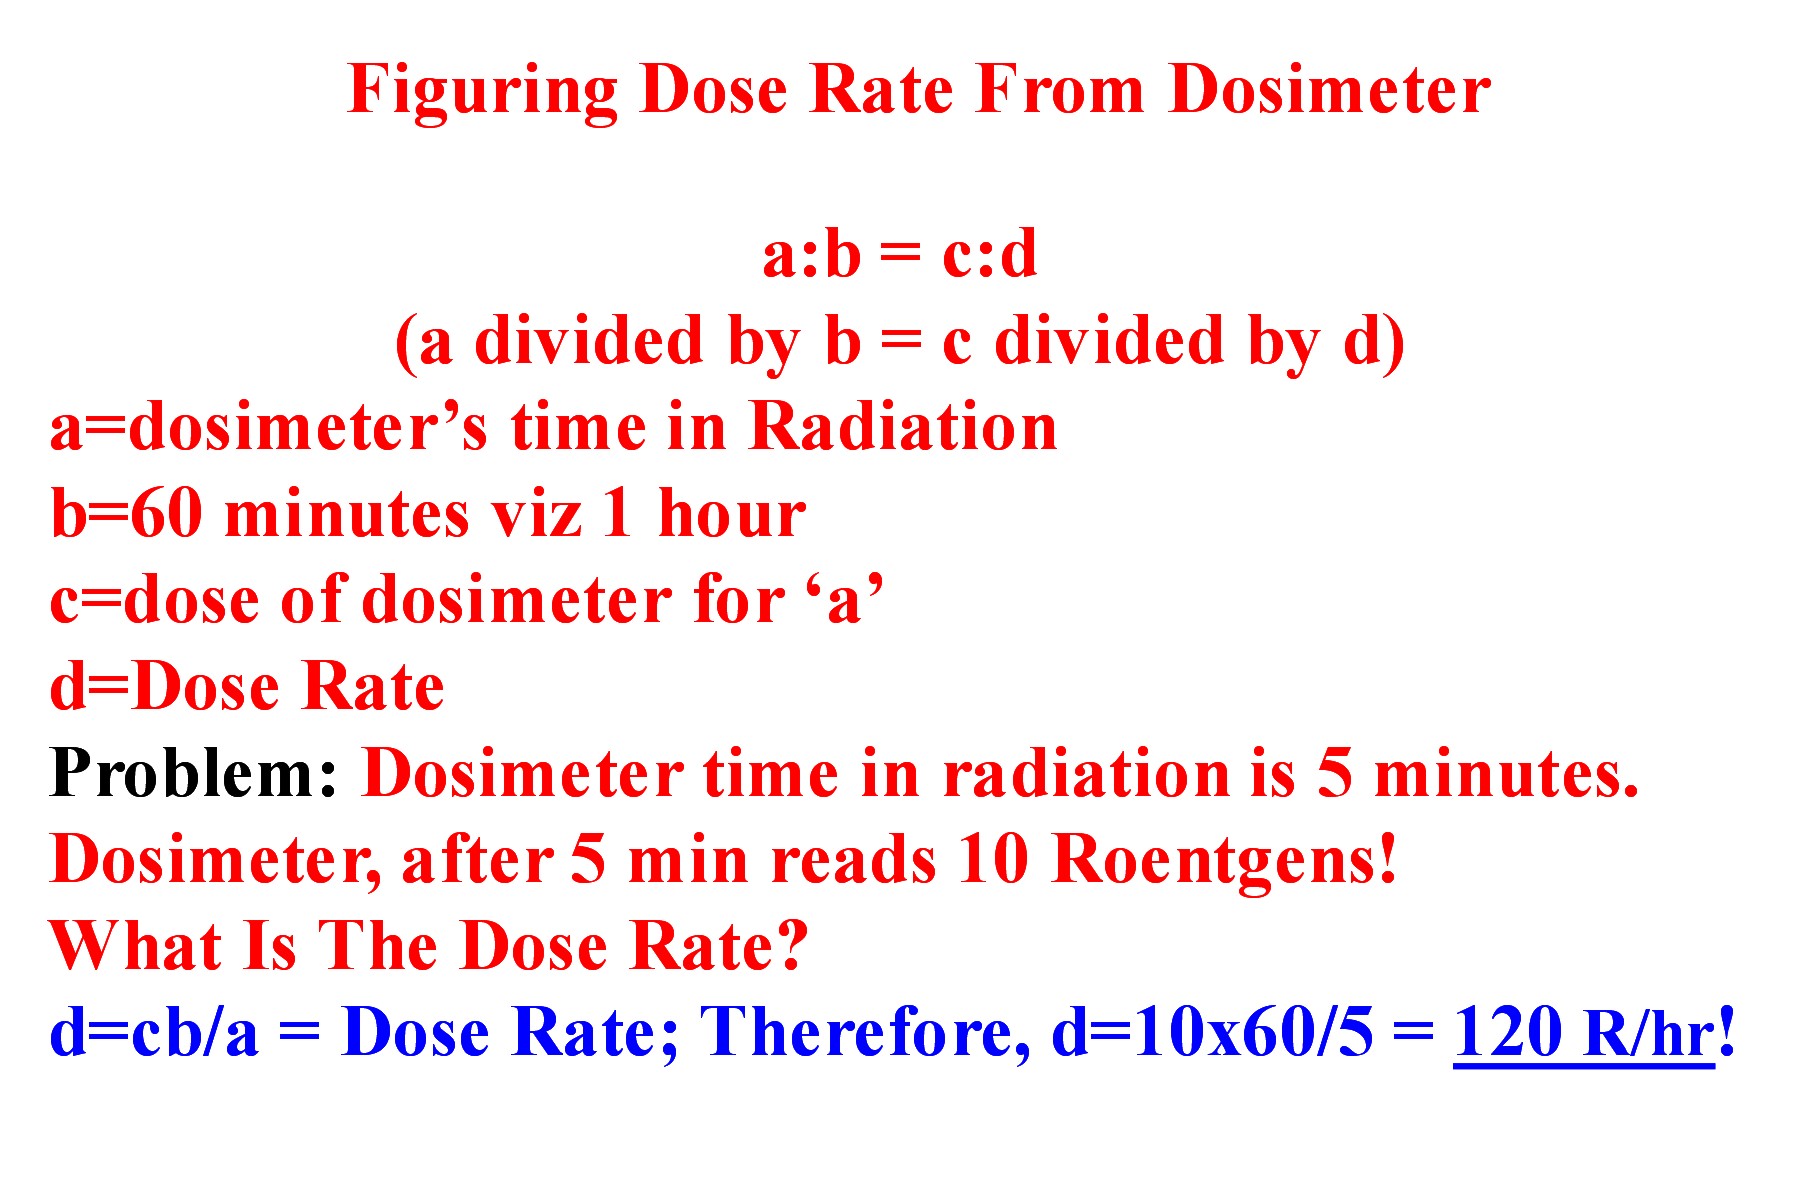 Using Your Dosimeter To Find The Dose Rate!